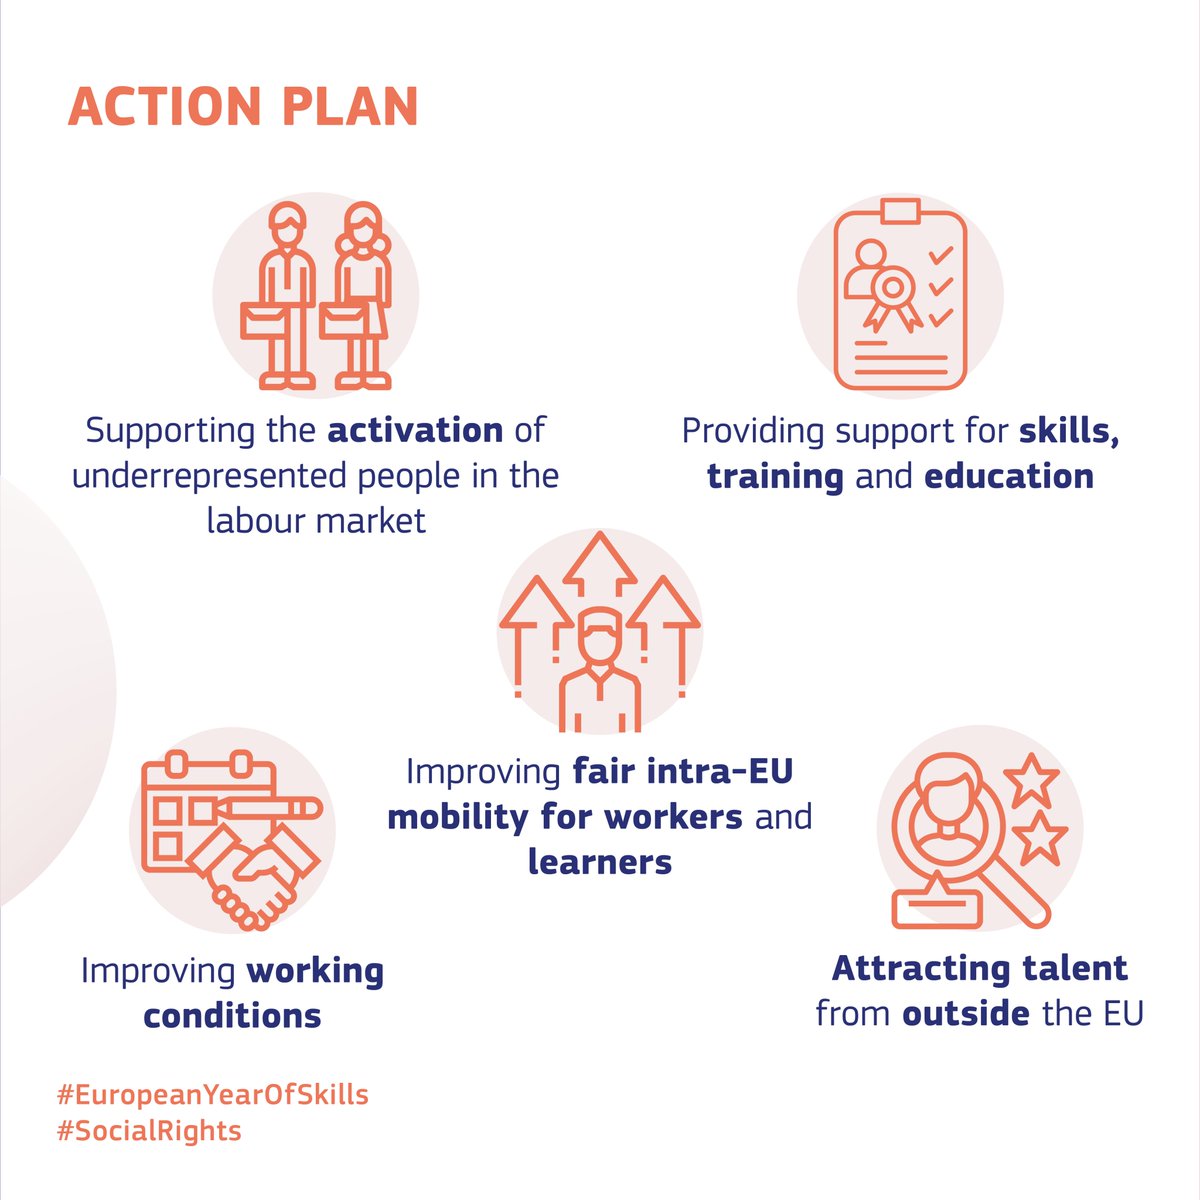 .@VDombrovskis 'Two thirds of SMEs cannot find the talent they need. This affects our 🇪🇺 competitiveness.' Today @EU_Commission set out actions to tackle labour shortages by improving labour mobility and working conditions in key sectors and more. ➡️ europa.eu/!WJwfb3